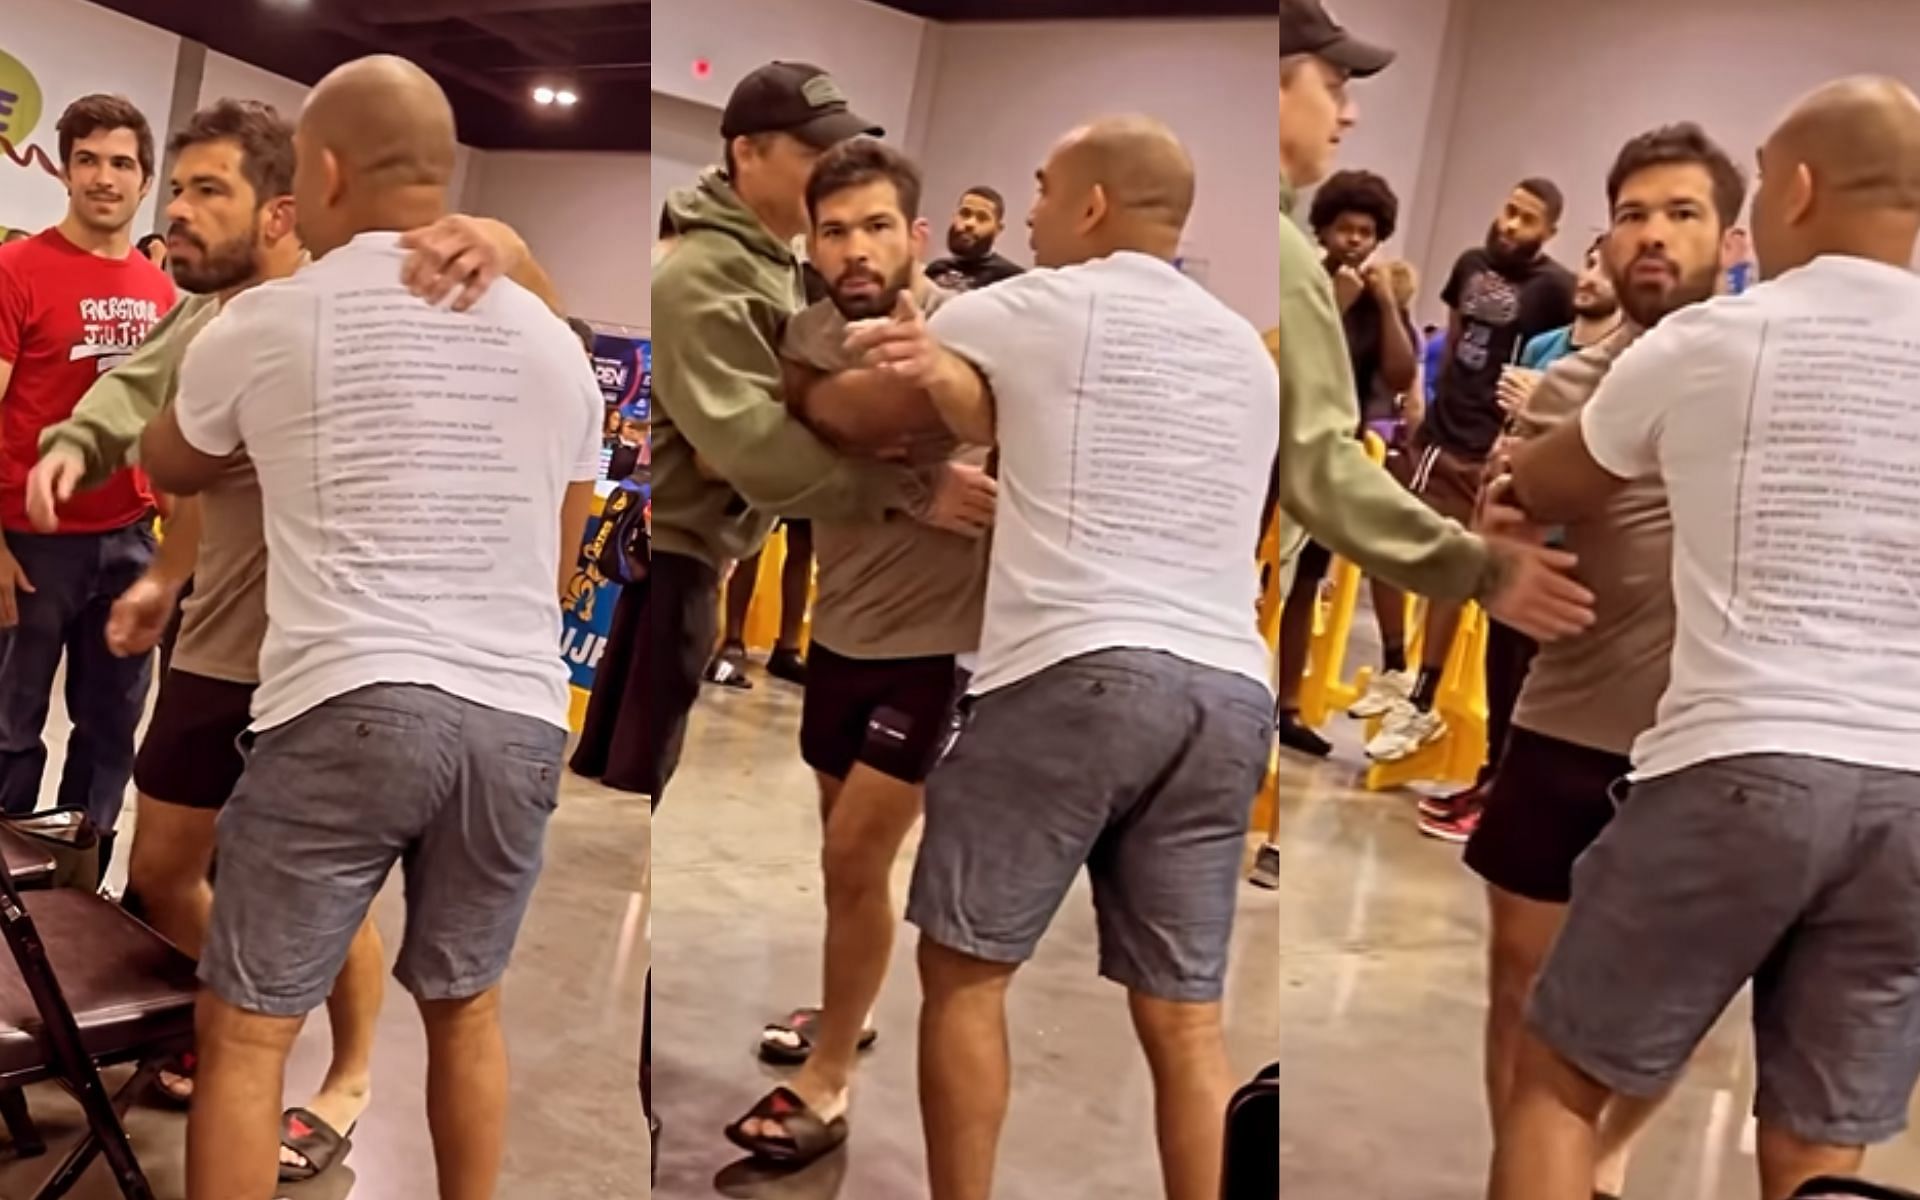 Footage of former UFC bantamweight Raphael Assuncao spitting at his opponent at BJJ tournament [Images Courtesy: @jiujitsuradio on Instagram]